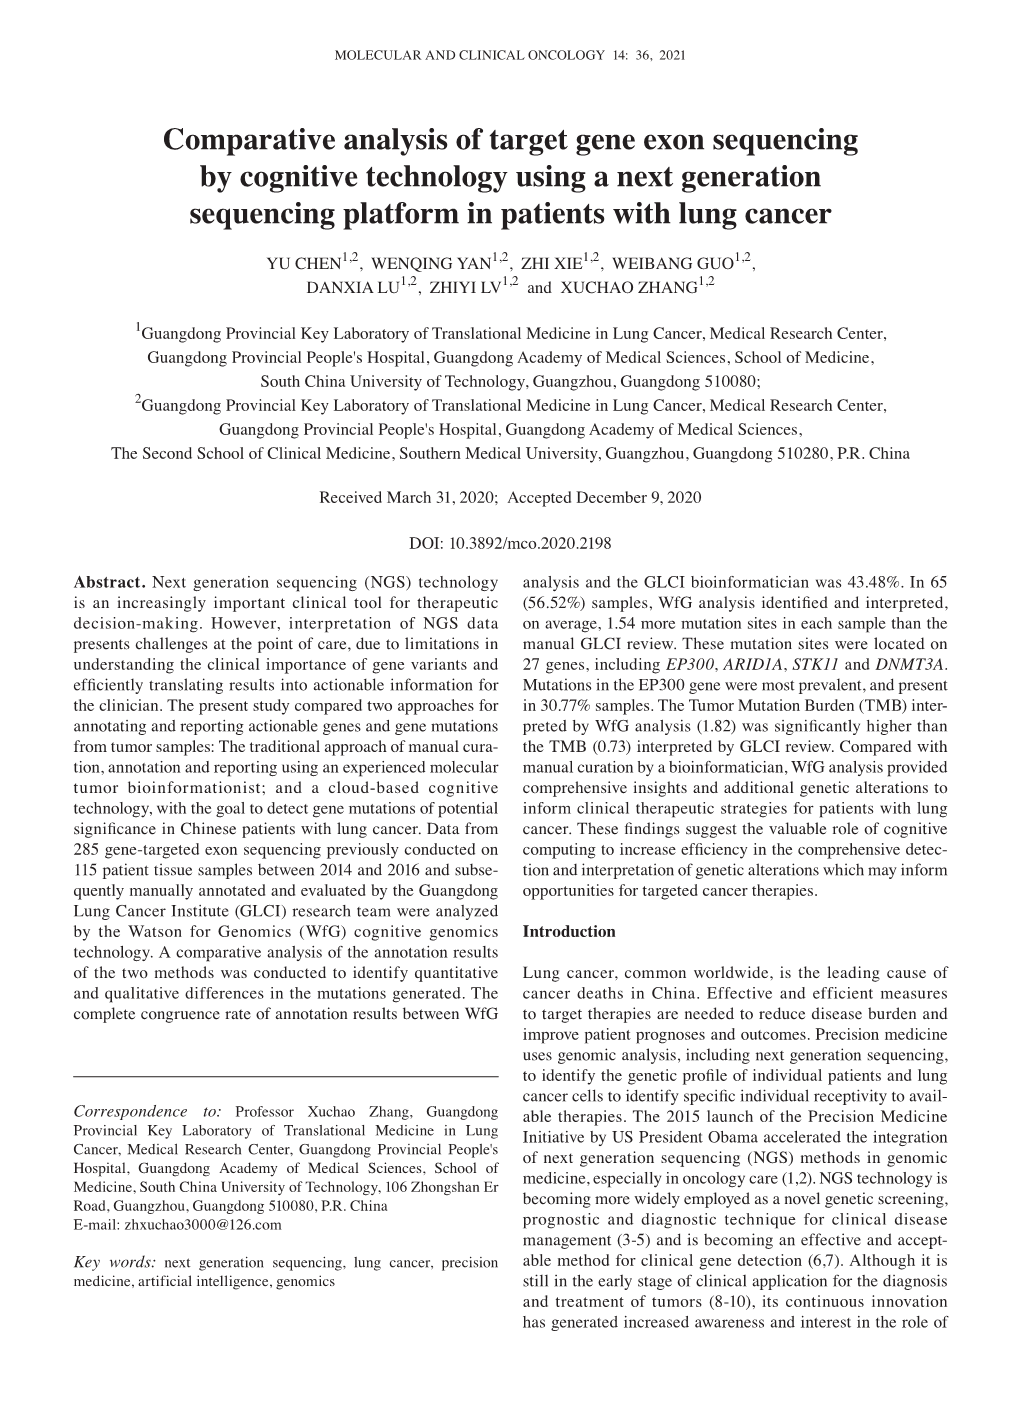 Comparative Analysis of Target Gene Exon Sequencing by Cognitive Technology Using a Next Generation Sequencing Platform in Patients with Lung Cancer